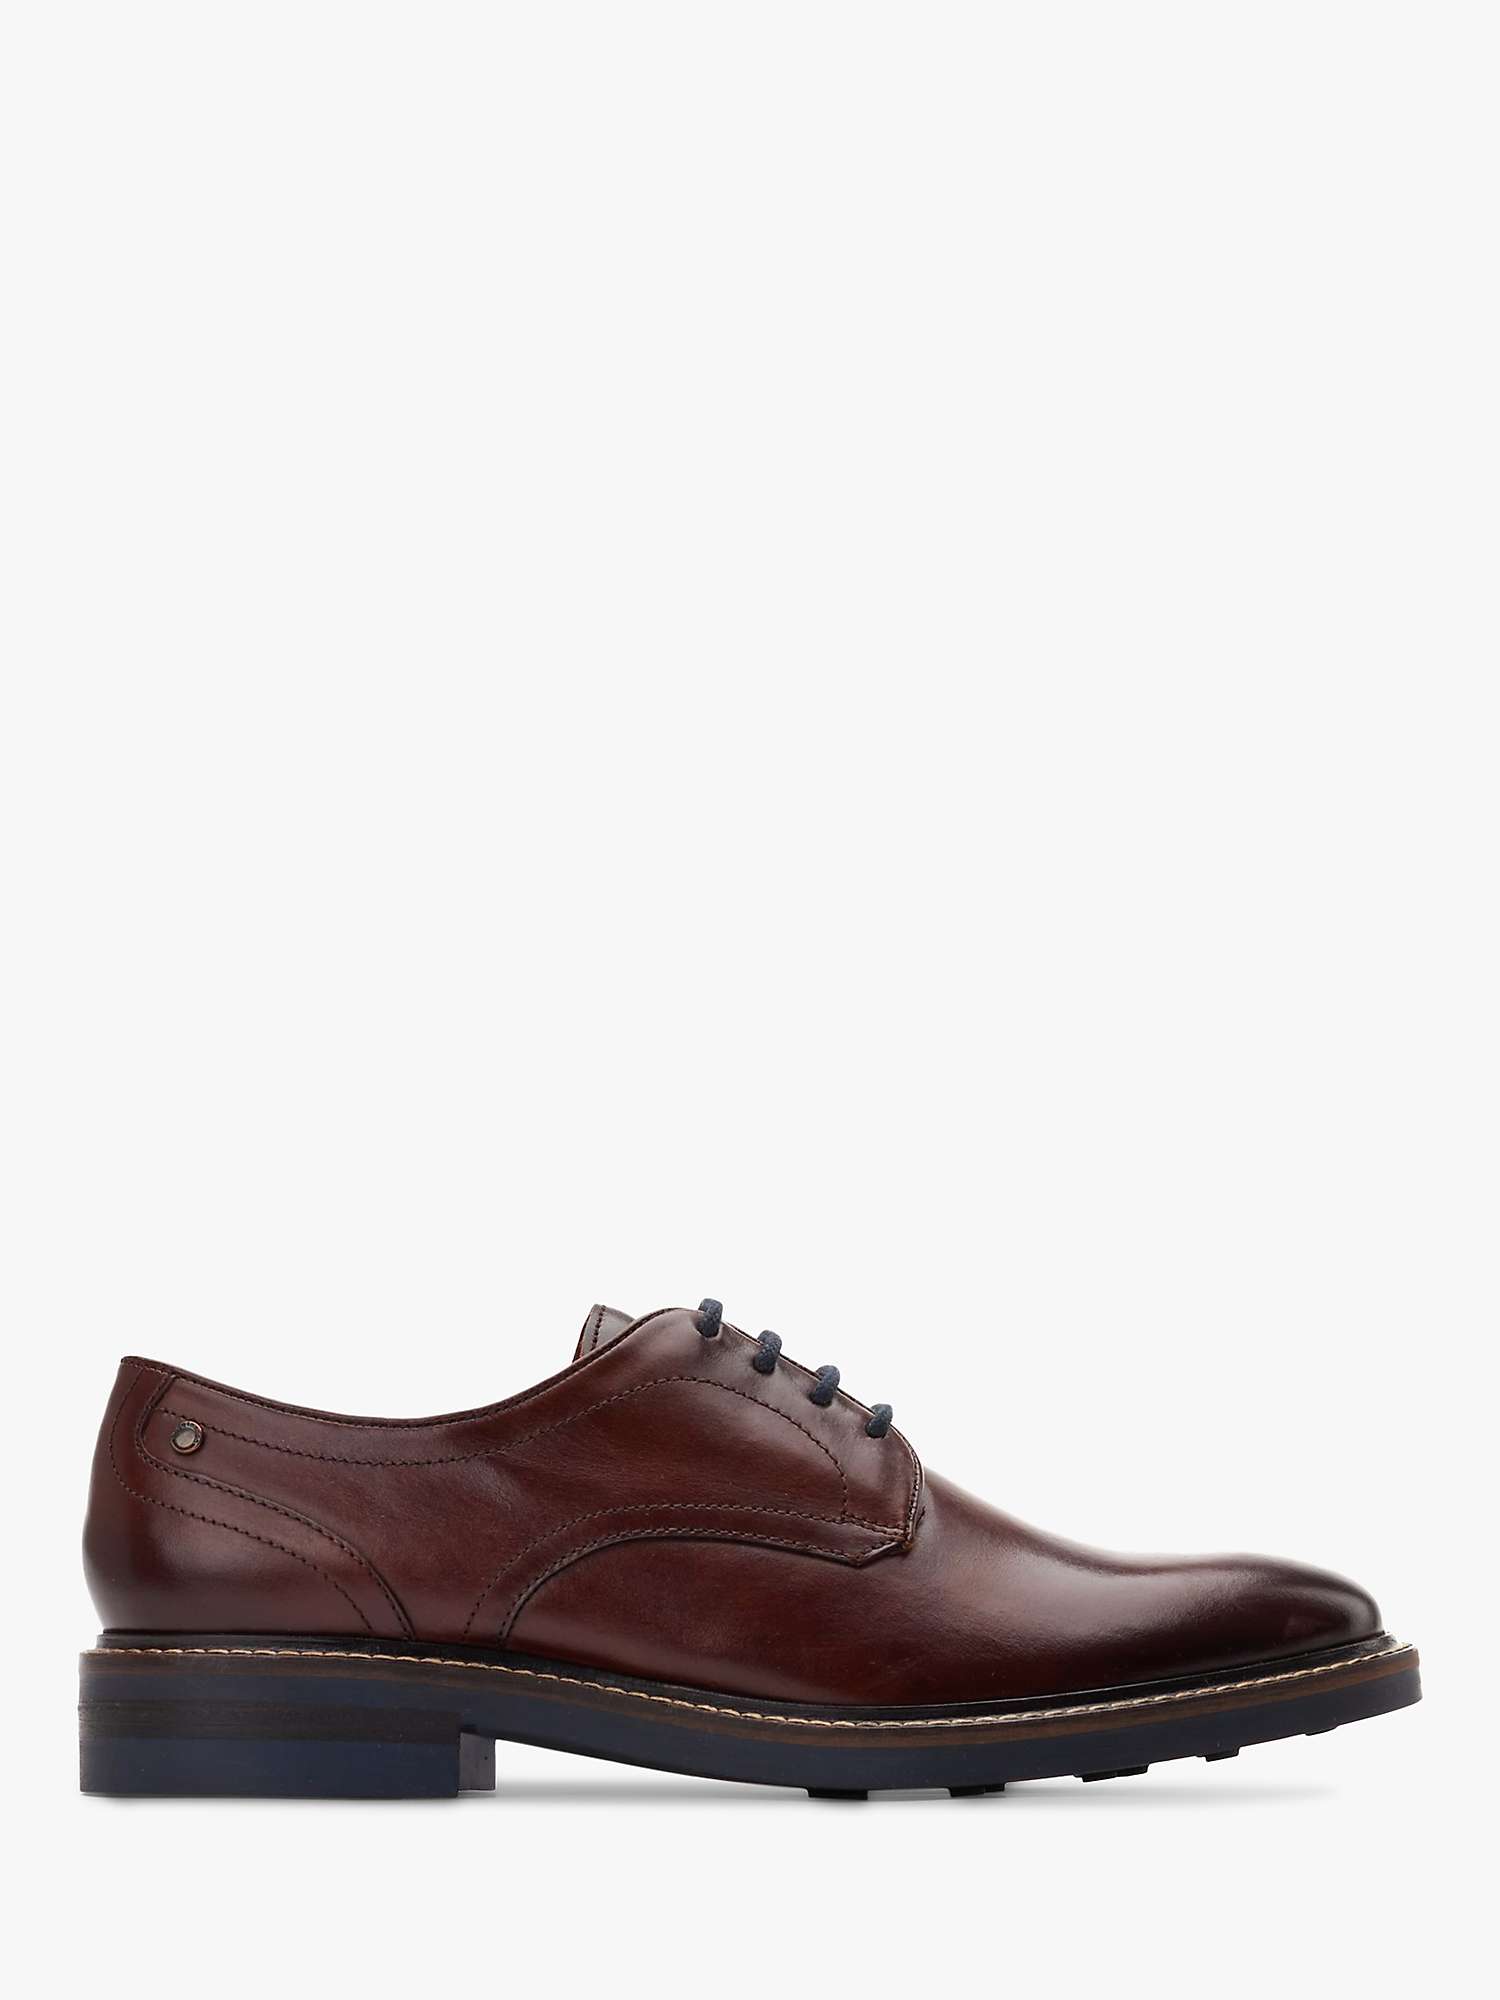 Buy Base London Mawley Chunky Derby Shoe, Brown Online at johnlewis.com